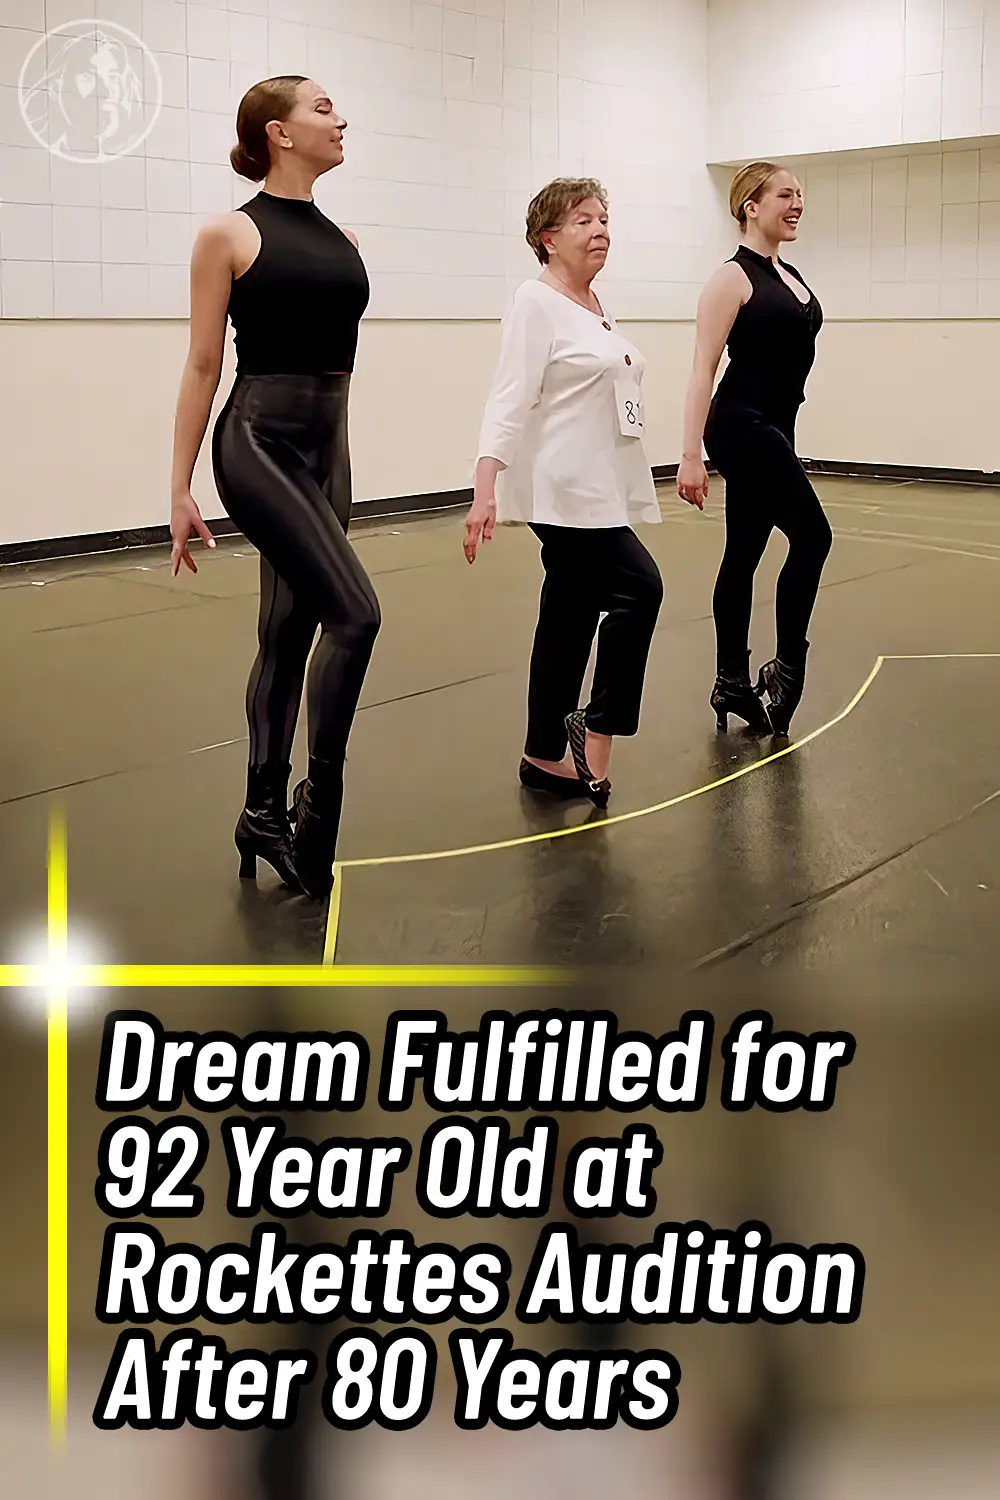 Dream Fulfilled for 92 Year Old at Rockettes Audition After 80 Years